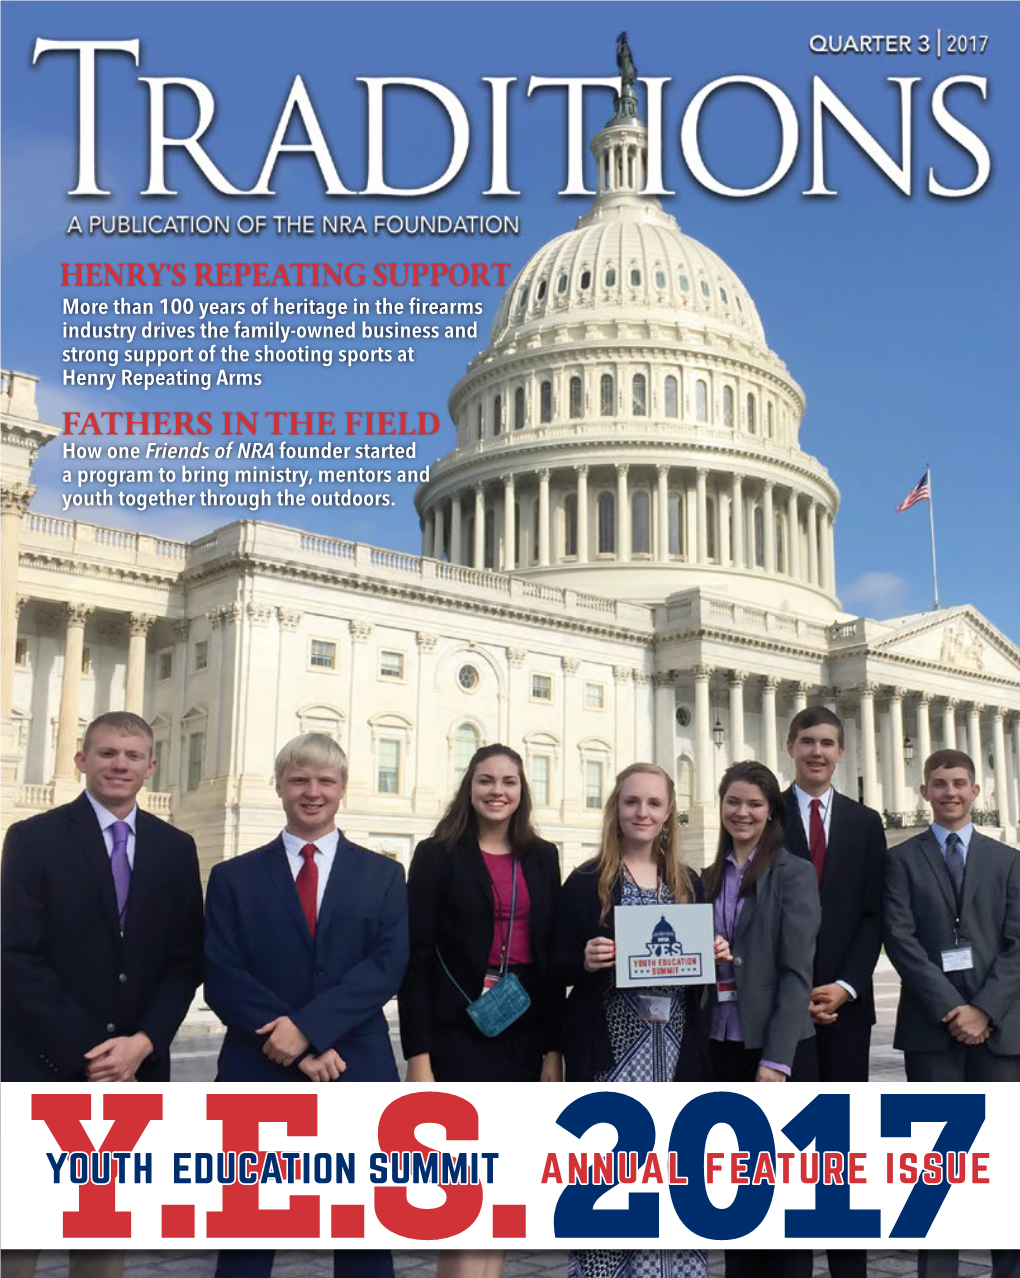 Youth Education Summit Annual Feature Issue